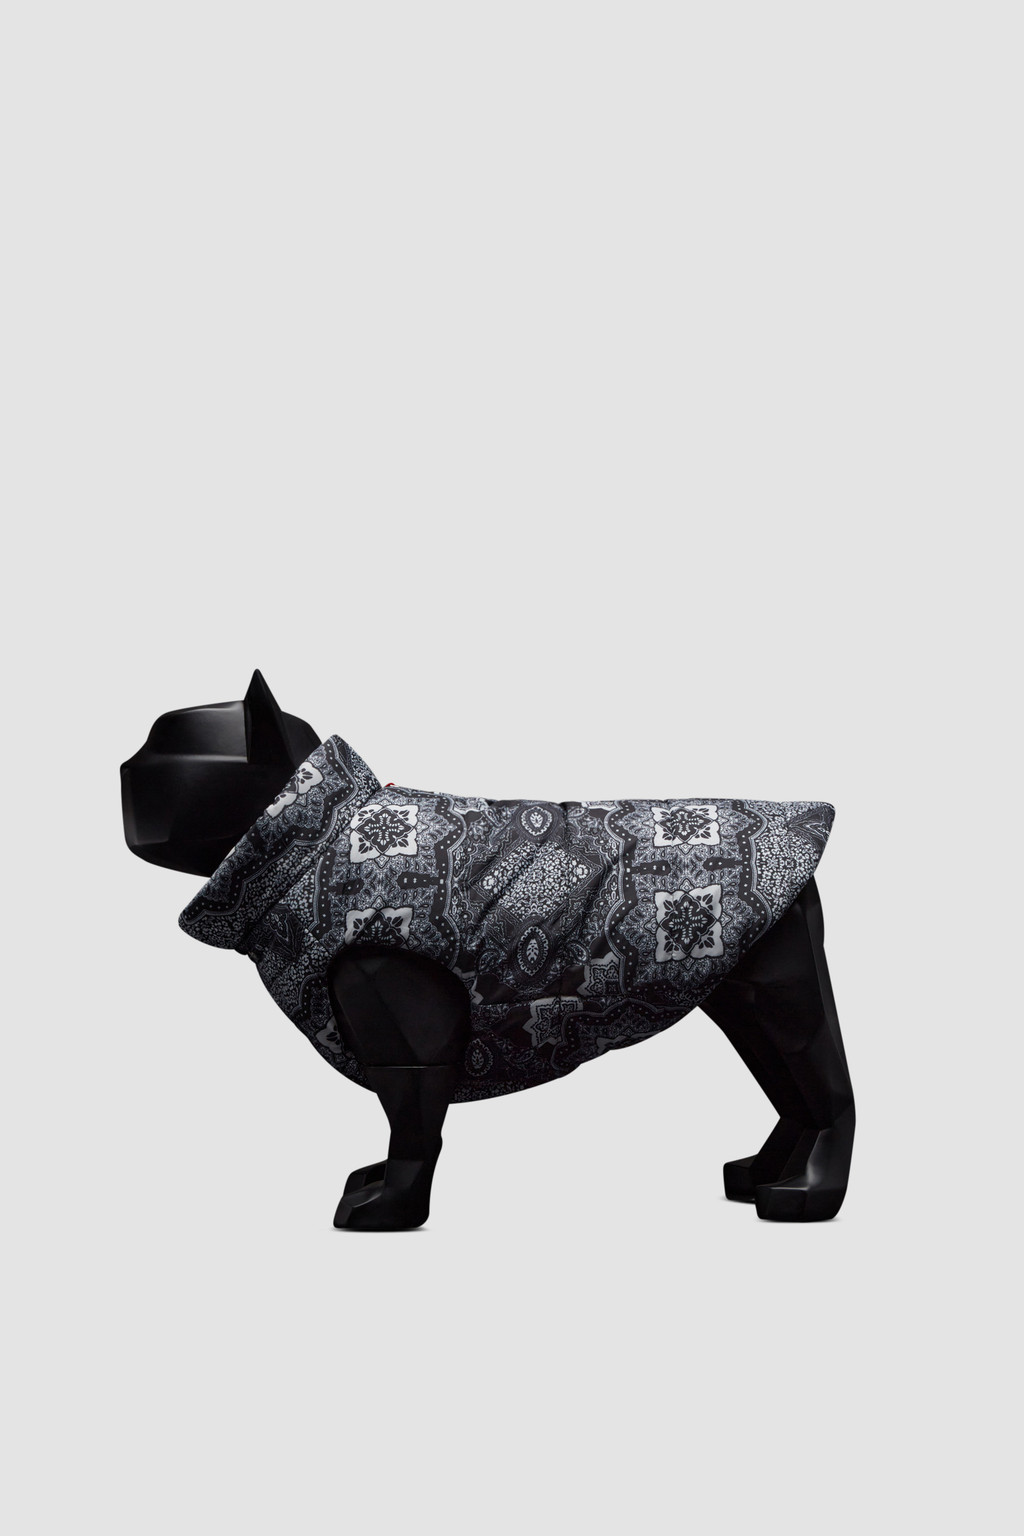 Special Projects 向けの Moncler Poldo Dog Couture - Moncler x 